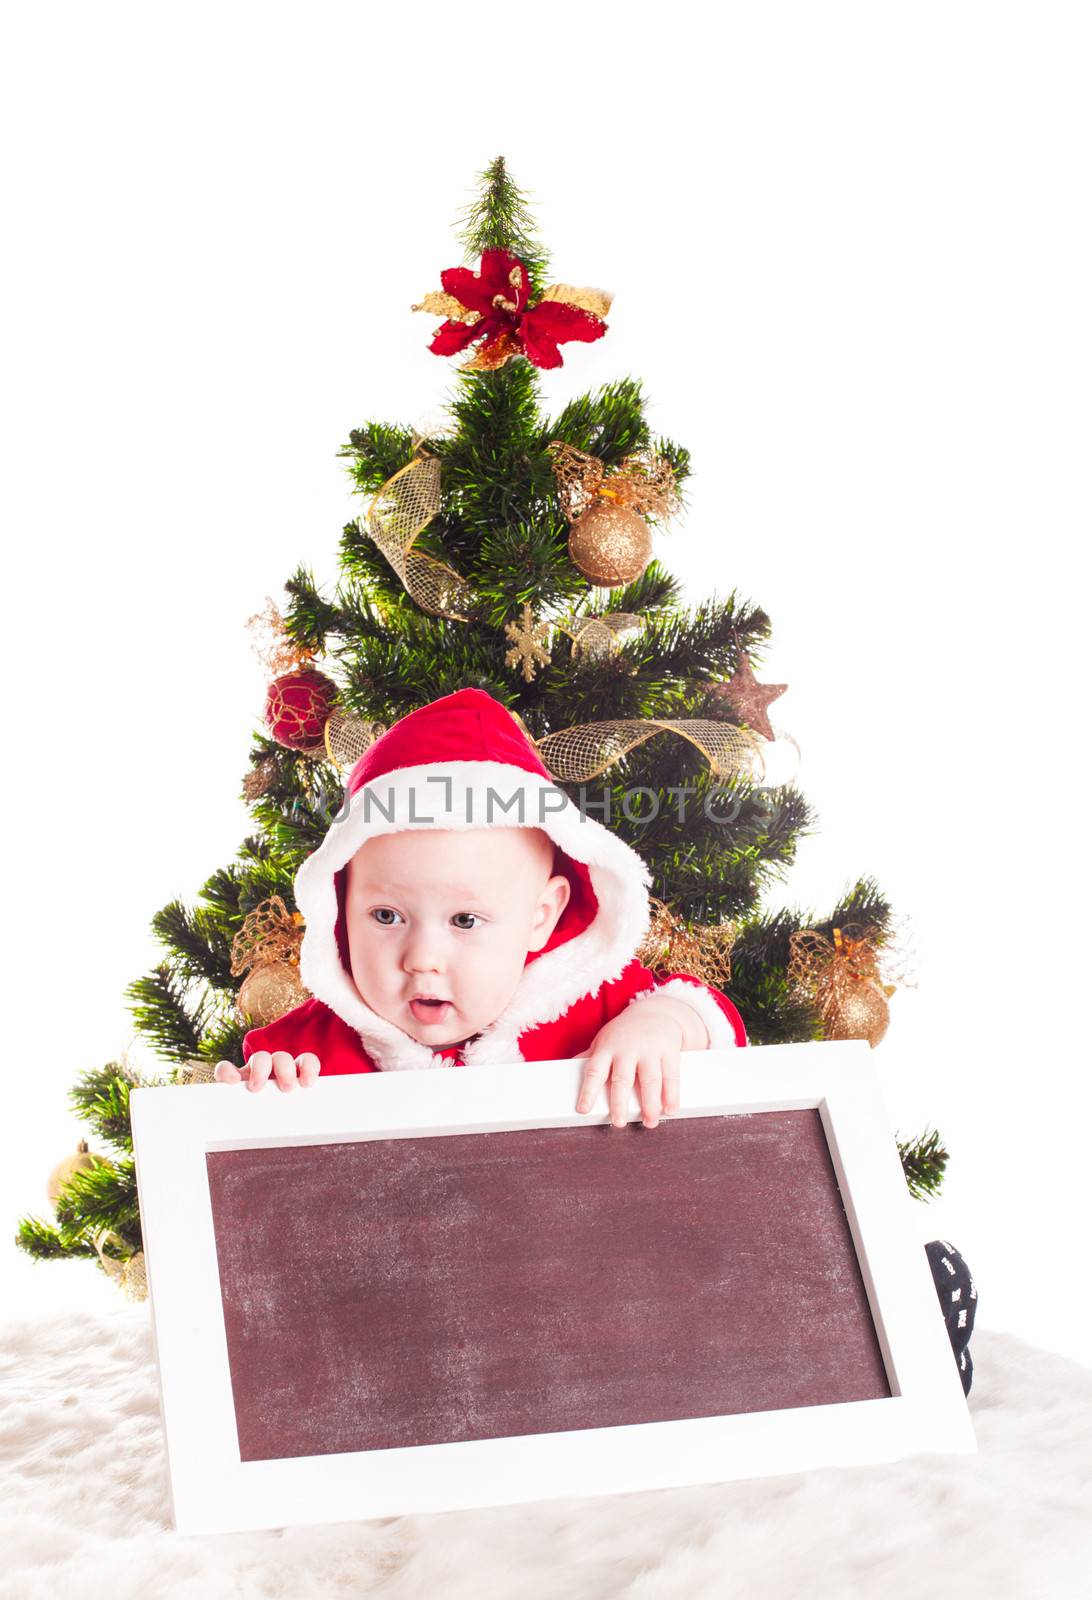 Santa and chalkboard with chritmas tree for greetings